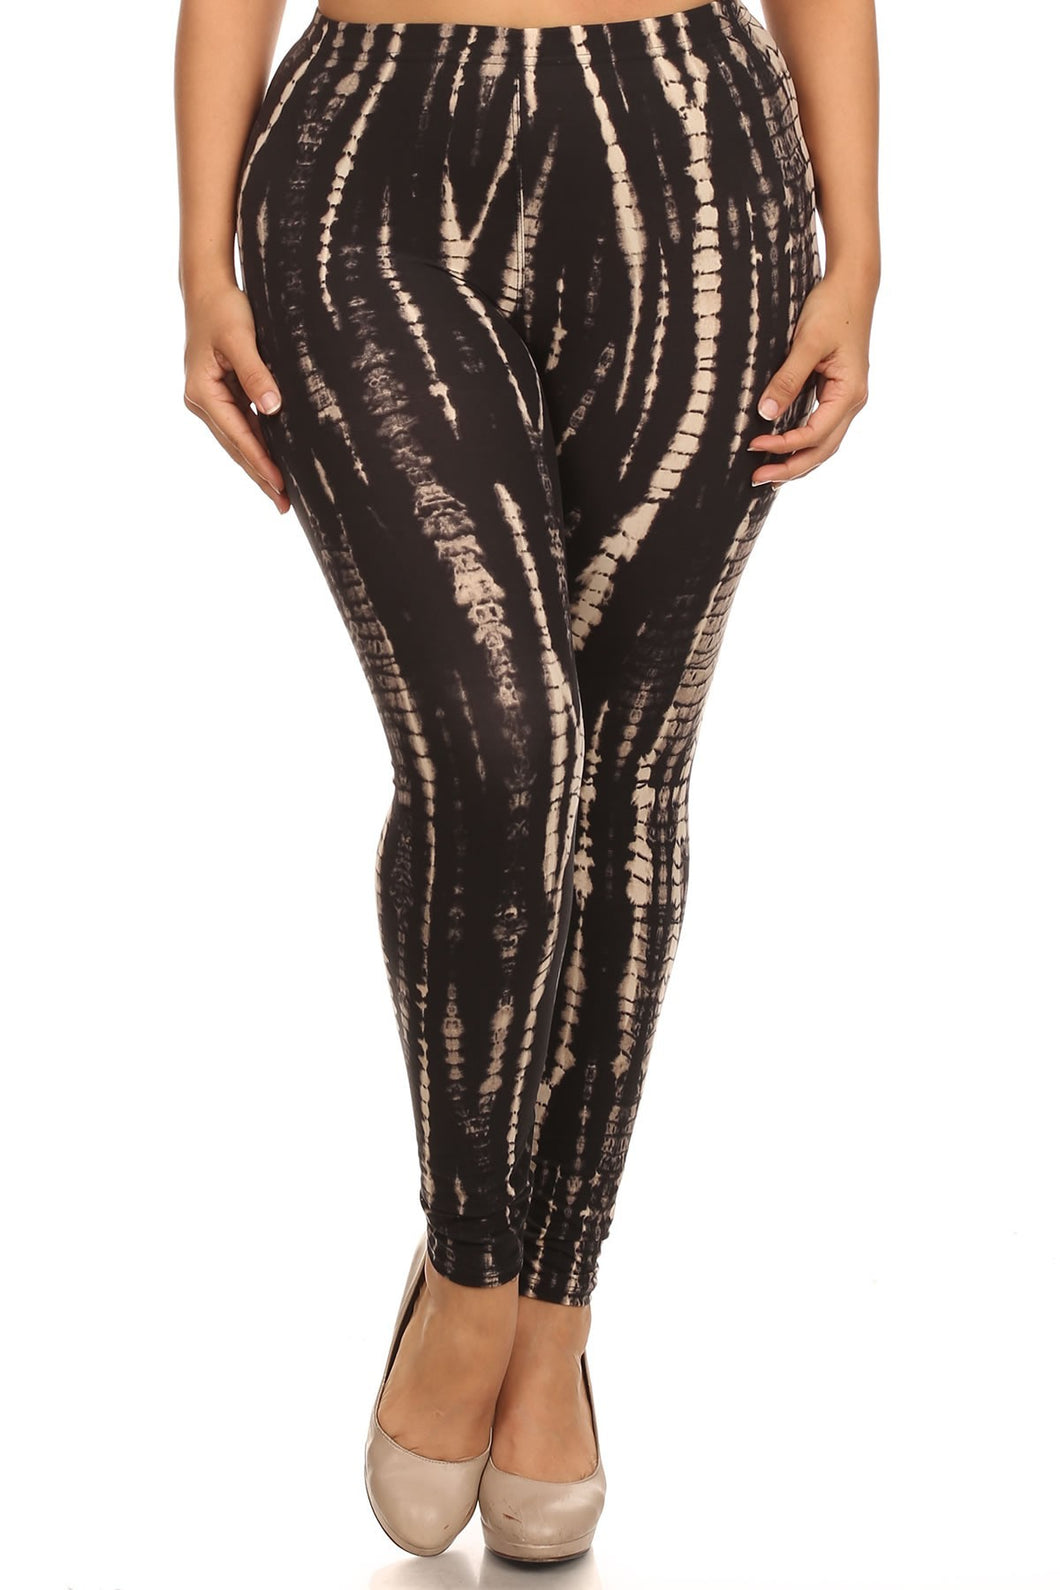 Plus Size Black And Tan Tie Dye Print Full Length Fitted Leggings With High Waist.